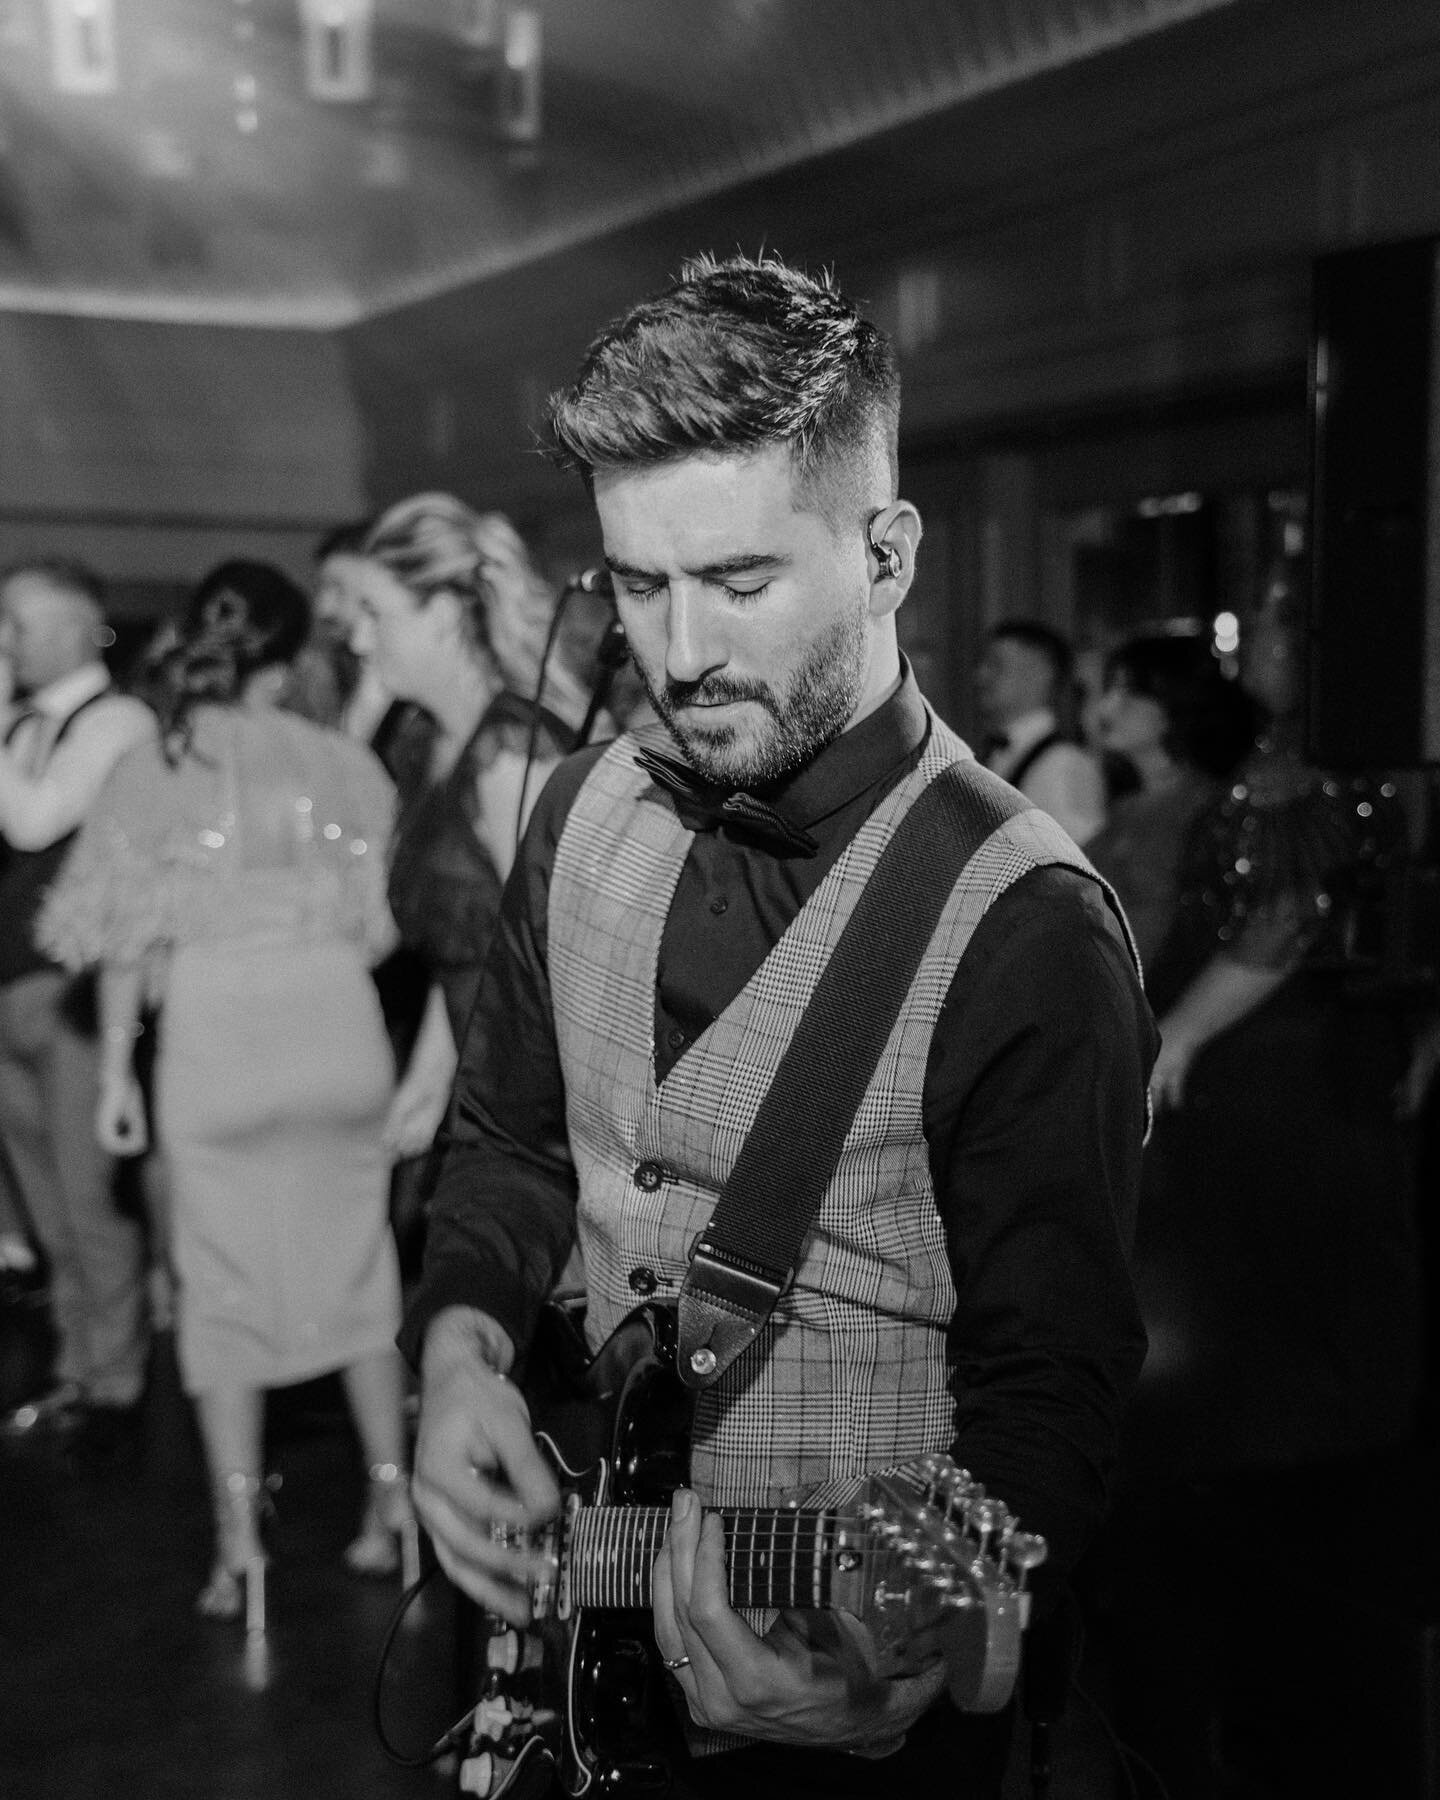 Apparently I take the last song of the night very seriously 😂

Ready for another packed weekend of 6 strings n&rsquo; singing!

📸 @missmediaphotography 
🎸 @mojo_ni_